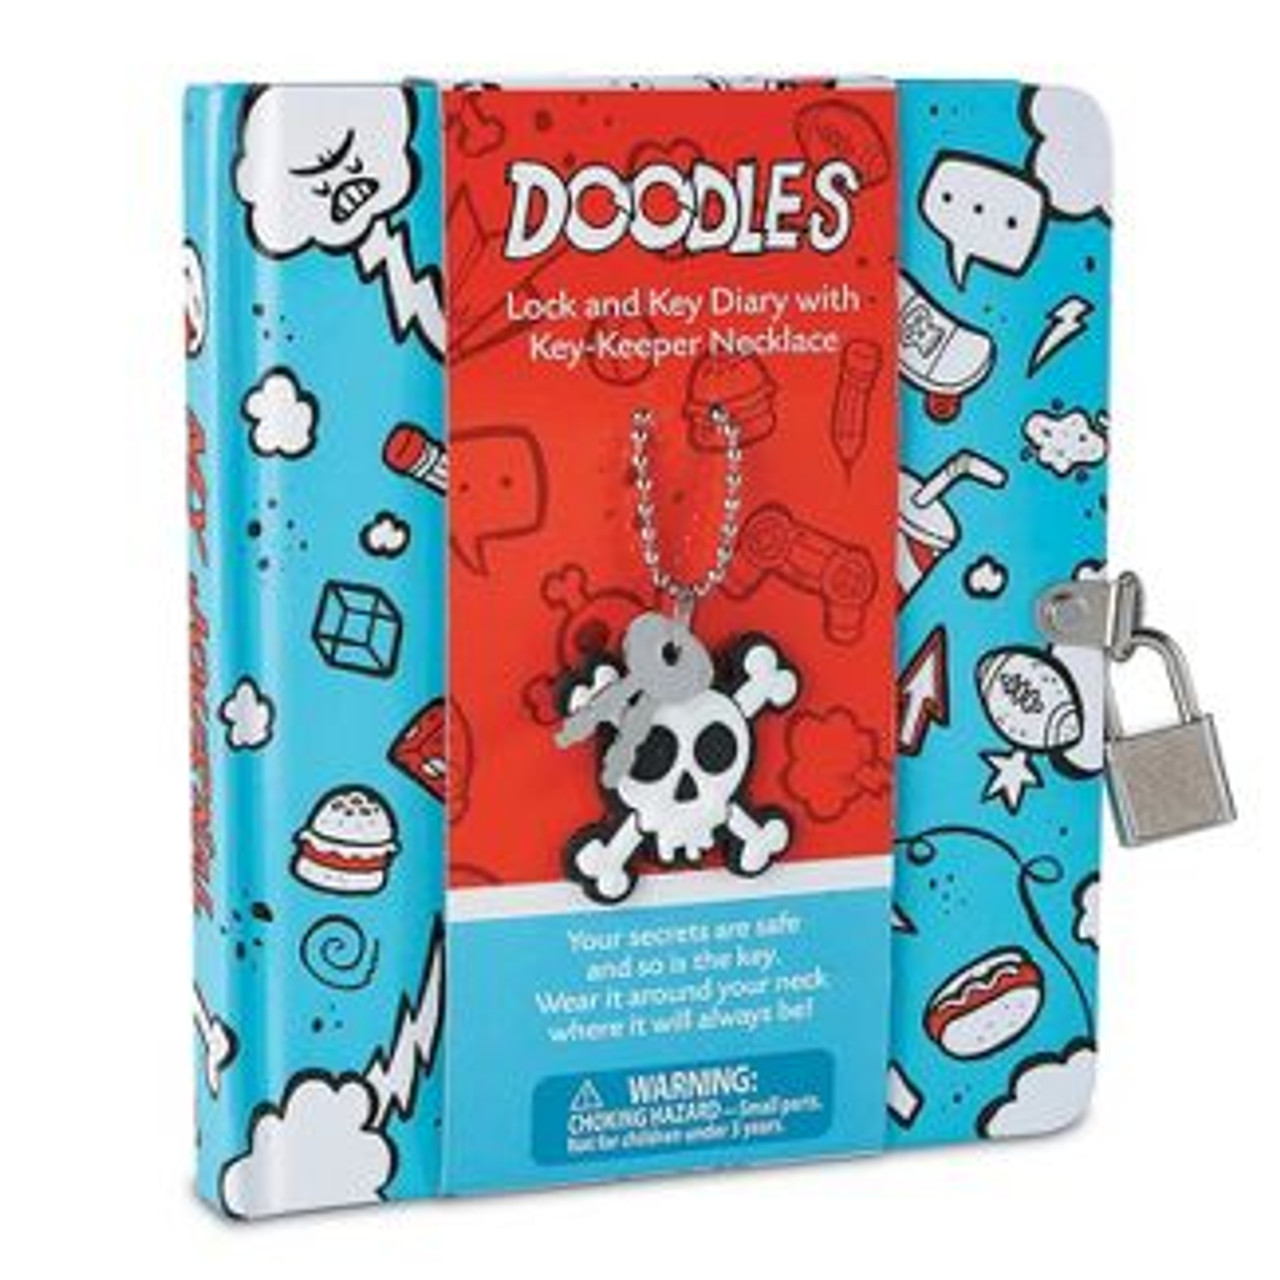 DOODLES KEY-KEEPER NECKLACE DIARY